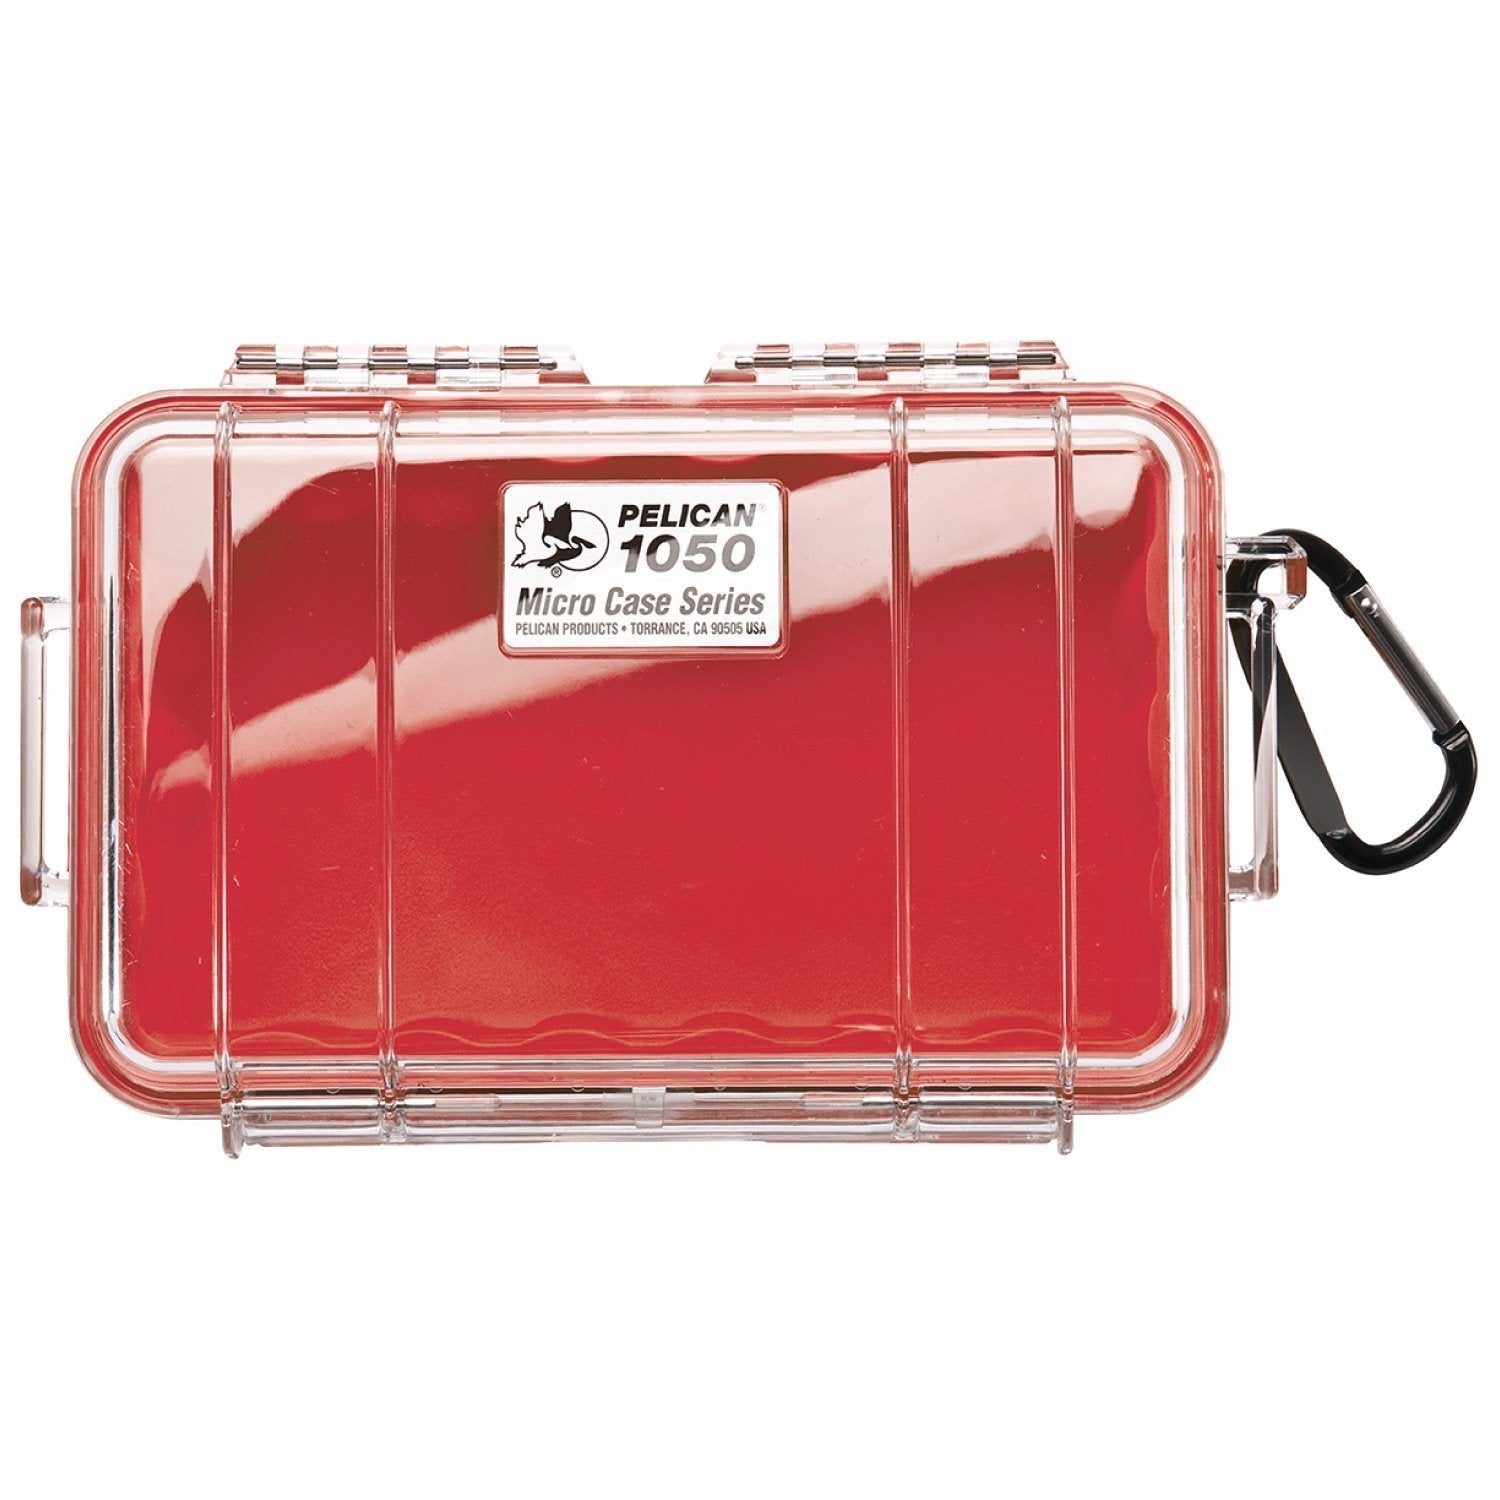 Pelican 1050 Micro Case Cases Pelican Products Clear Shell with Red Liner Tactical Gear Supplier Tactical Distributors Australia